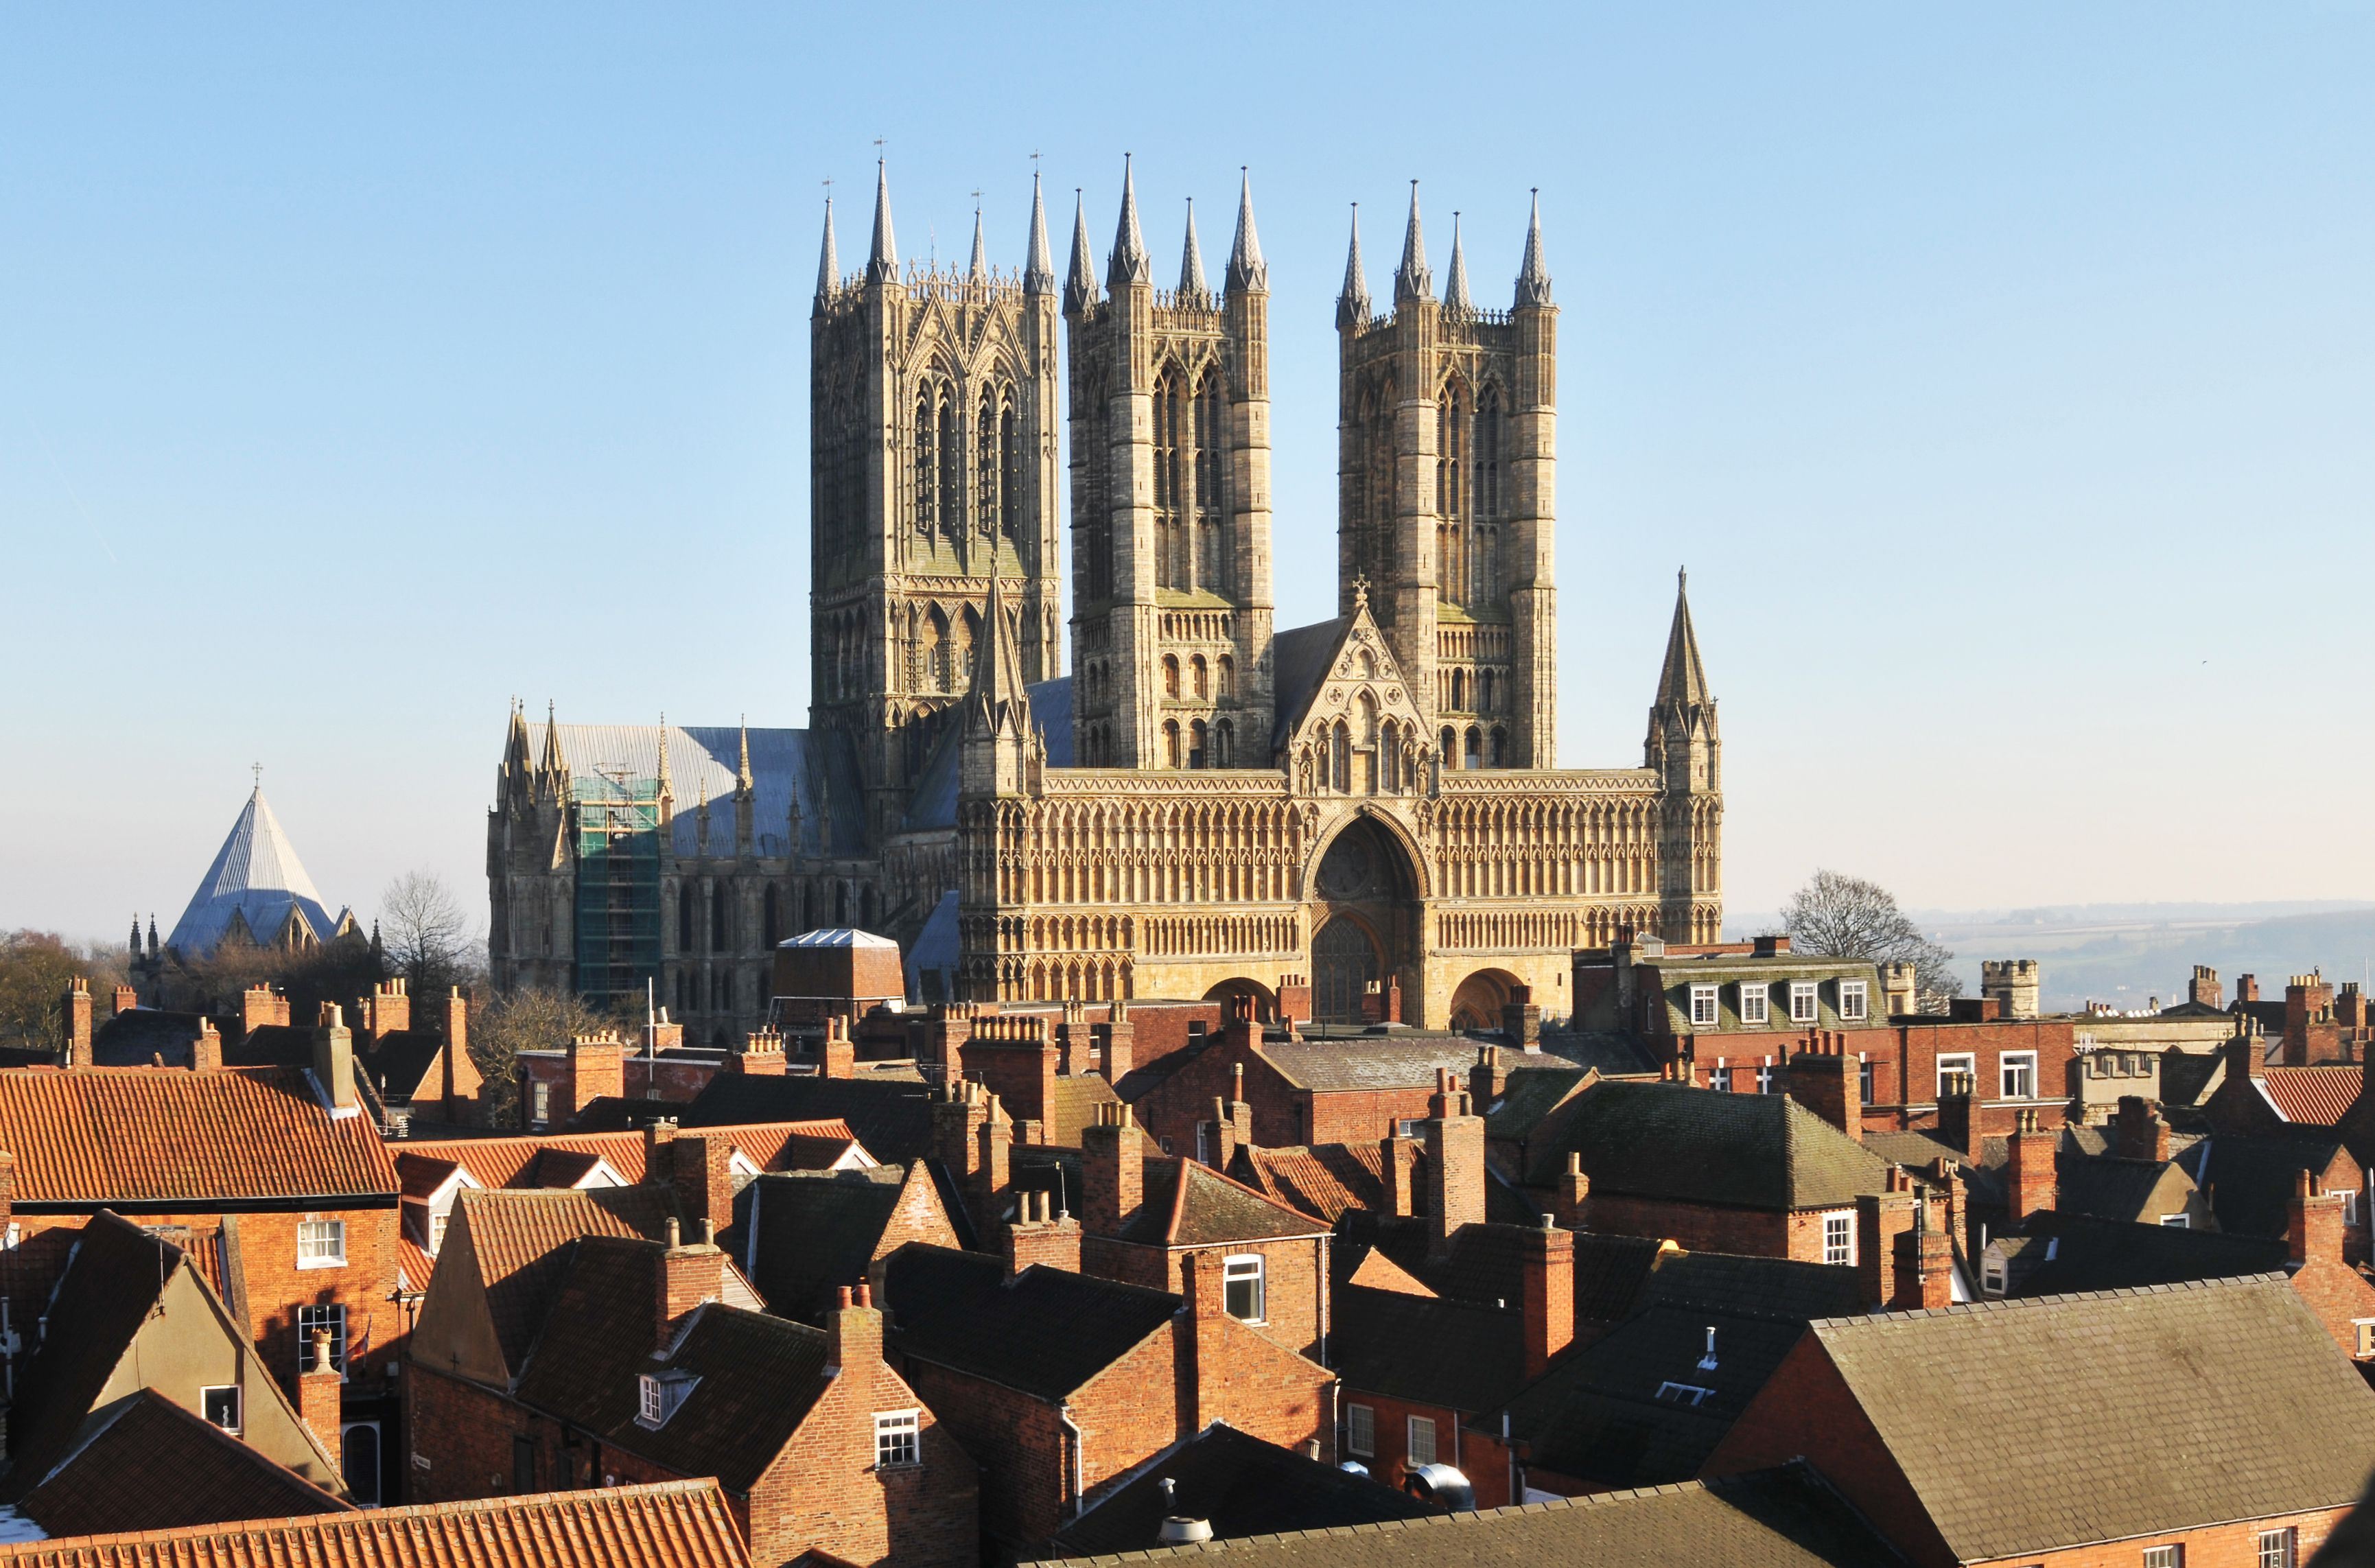 View of Lincoln Cathedral over tops of houses